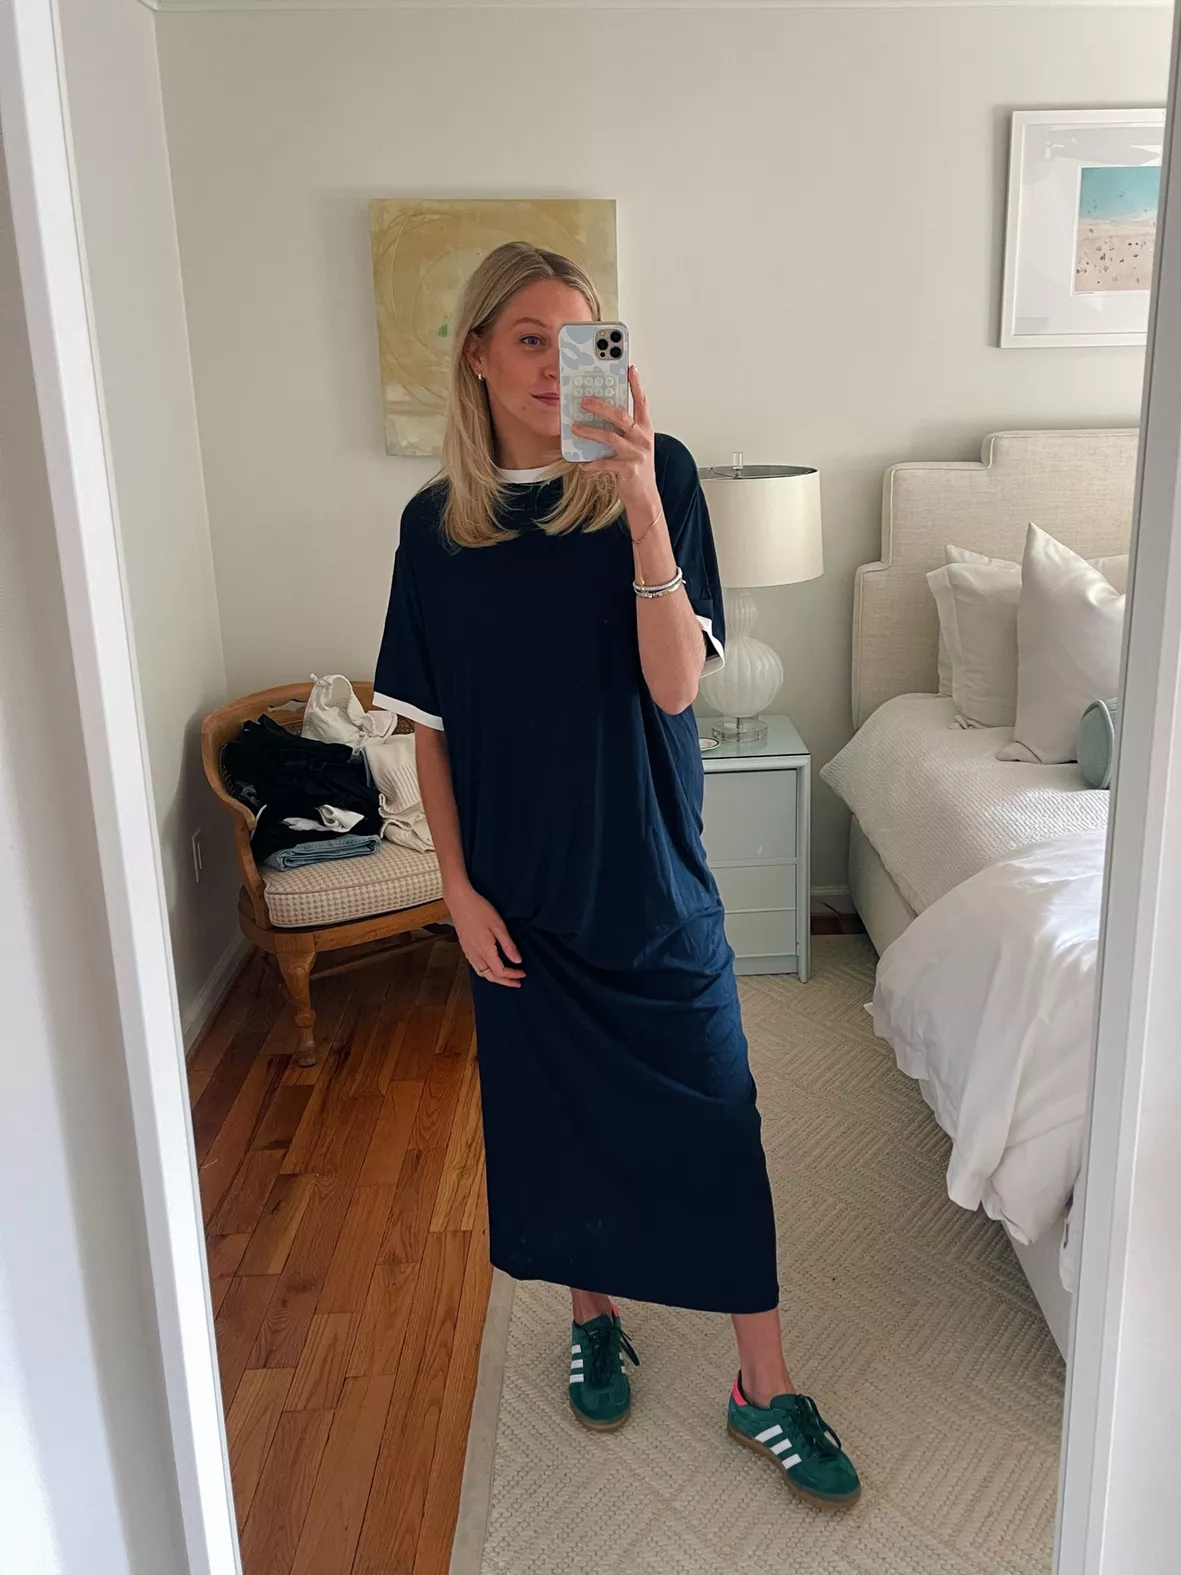 What do we think of these new T-shirt Ringer Long dress from @SKIMS #